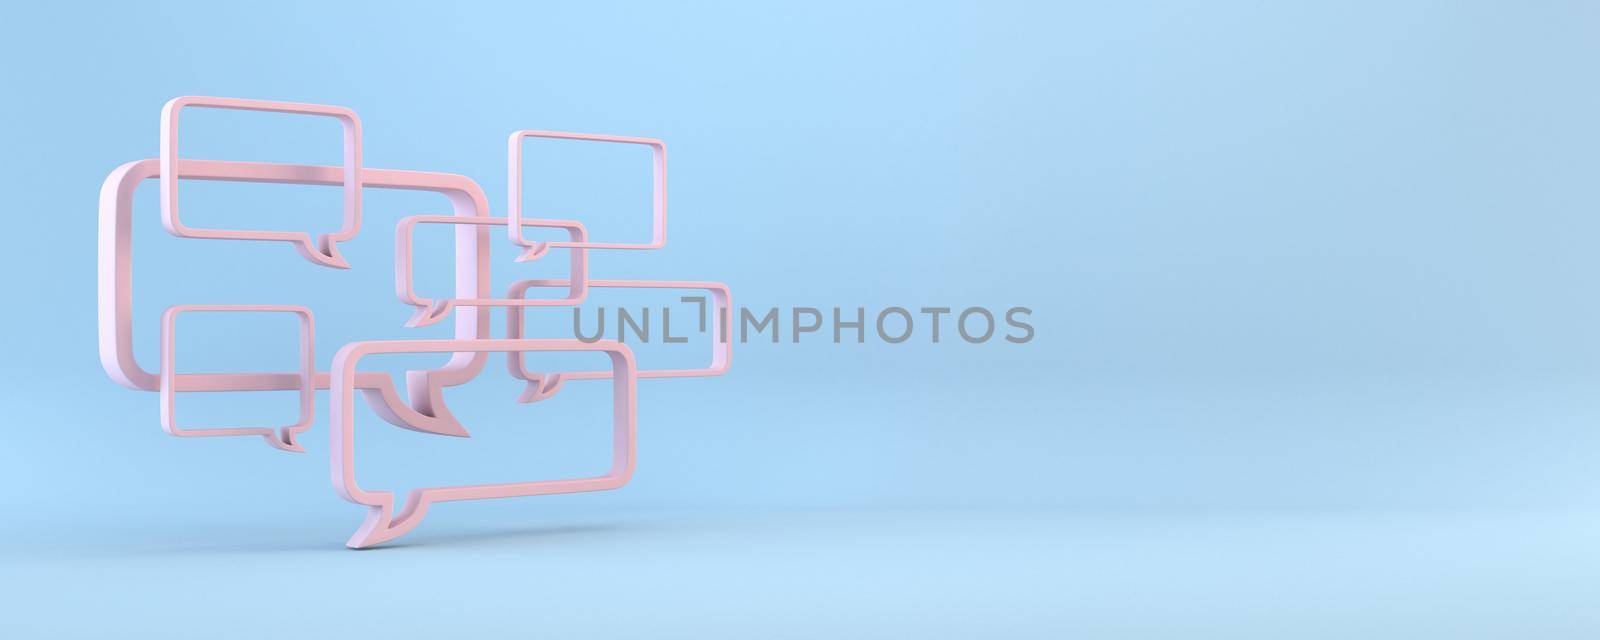 A lot of speech bubbles 3D rendering illustration isolated on blue background